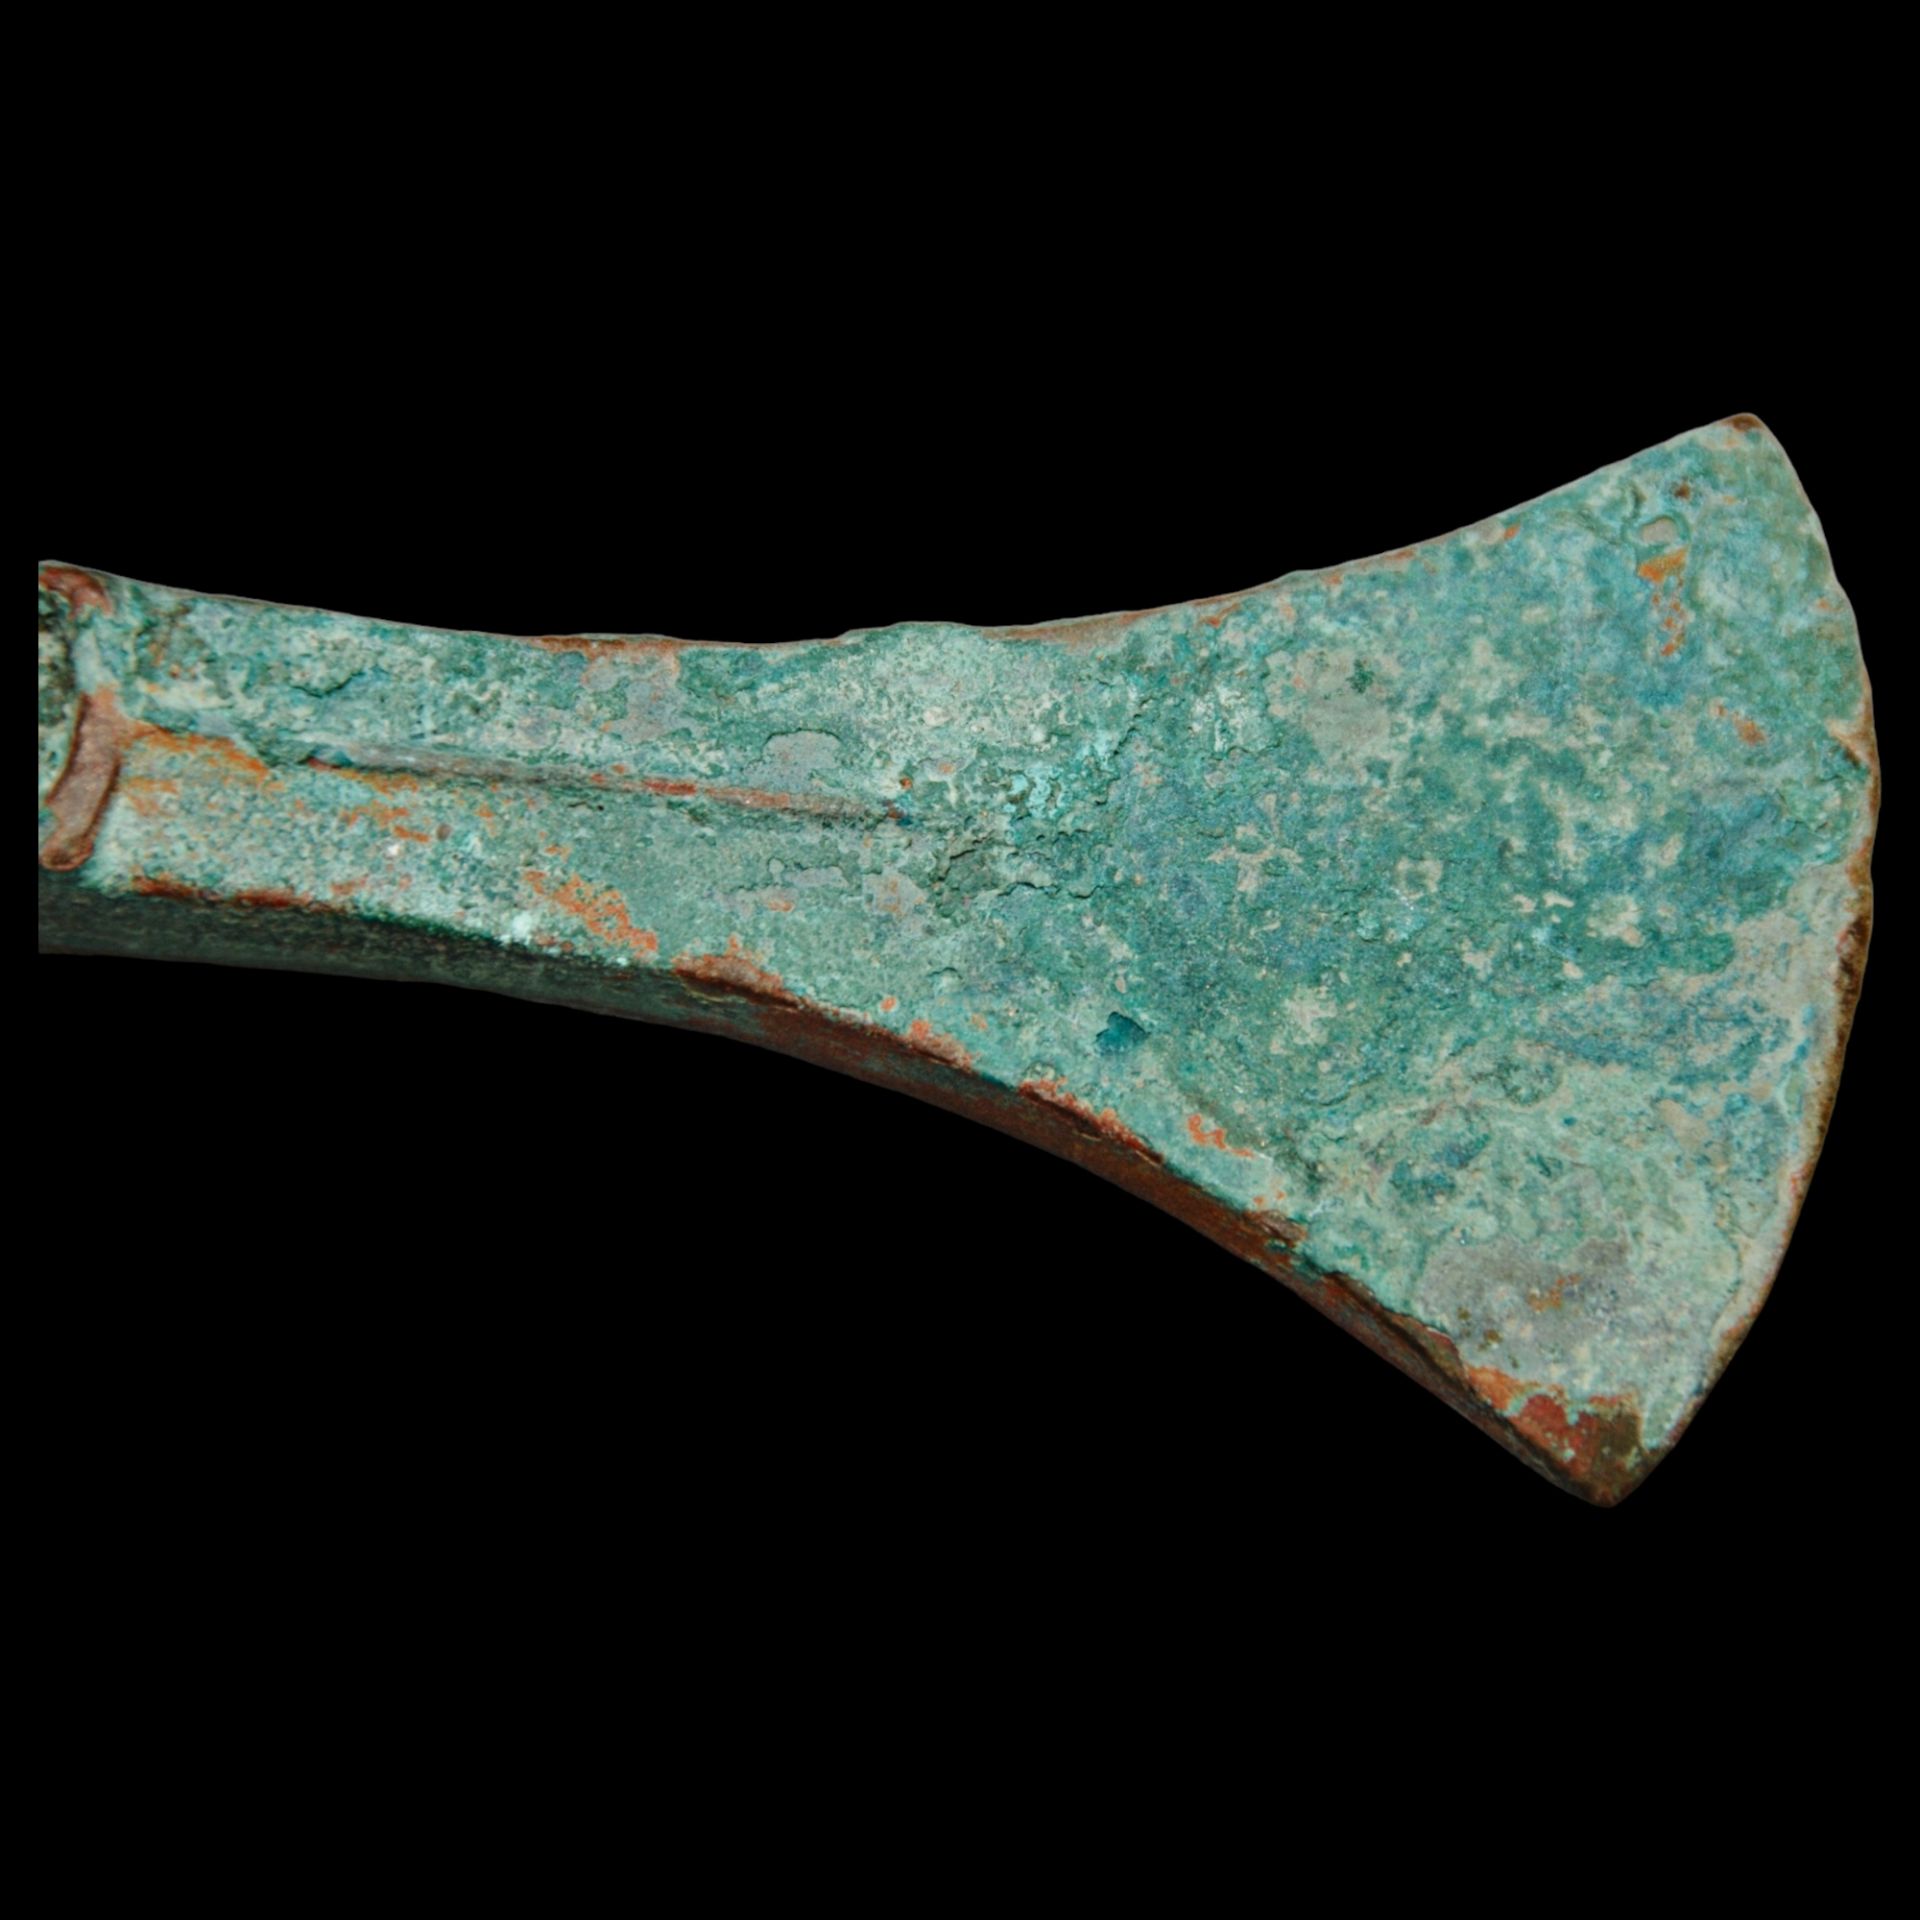 Two bronze axes, type Palstave 1500-1400 BCE. - Image 2 of 7